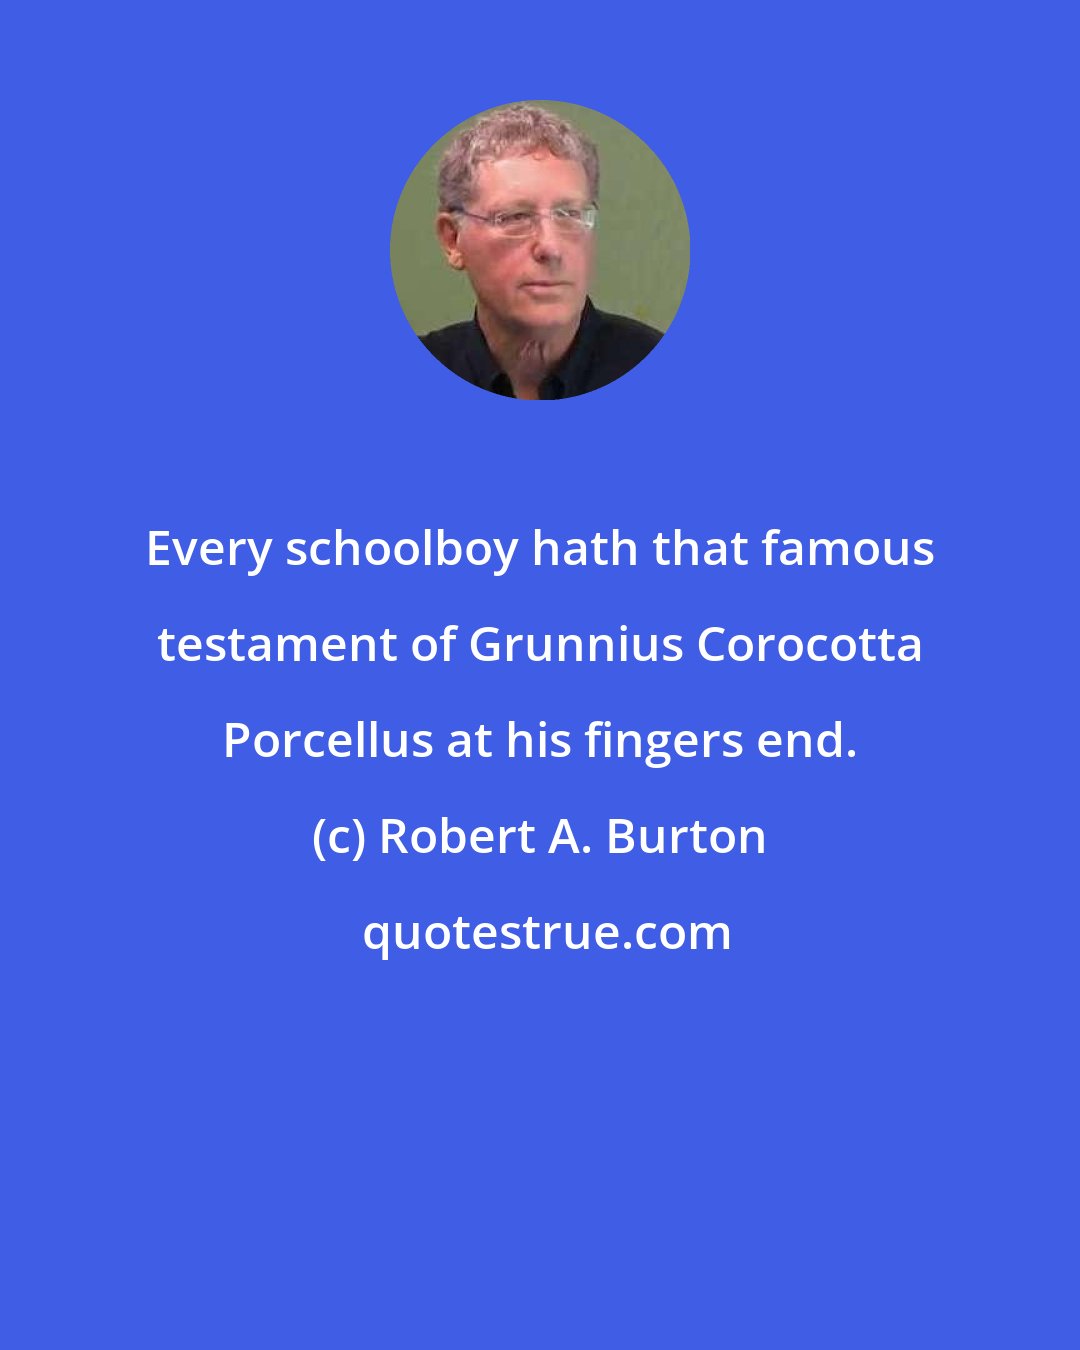 Robert A. Burton: Every schoolboy hath that famous testament of Grunnius Corocotta Porcellus at his fingers end.